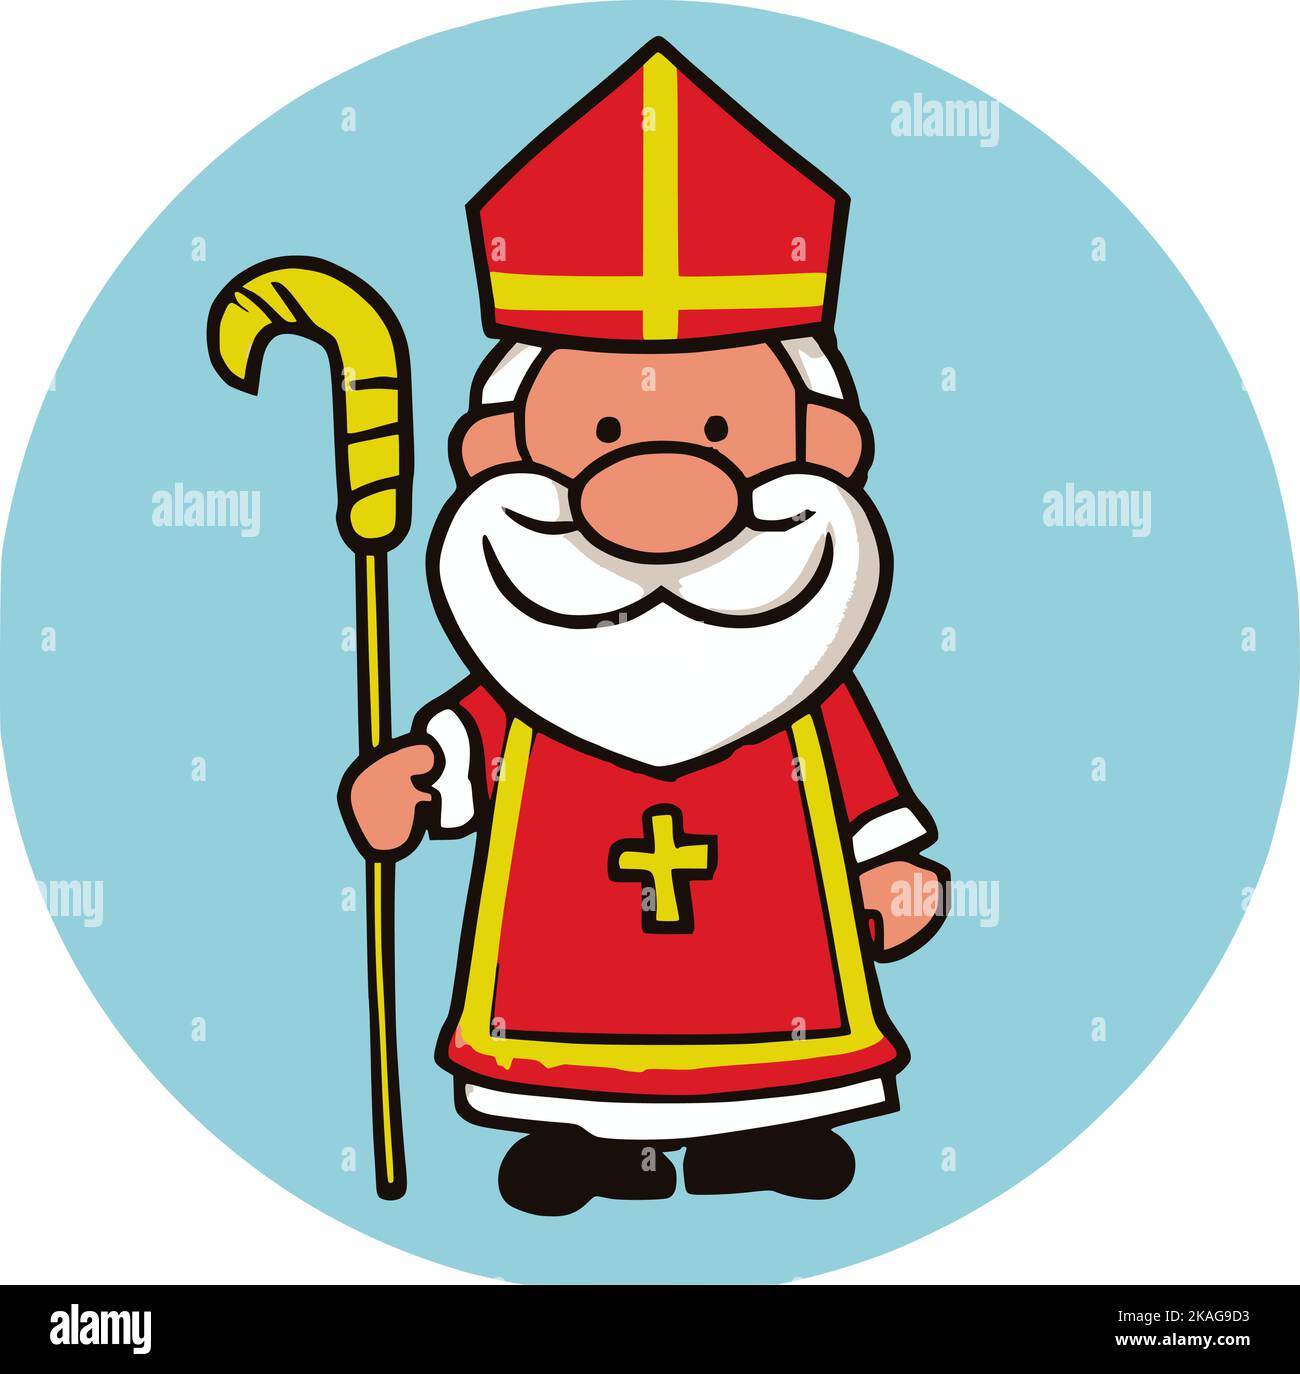 A Sinterklaas icon in a blue round against white background Stock Vector